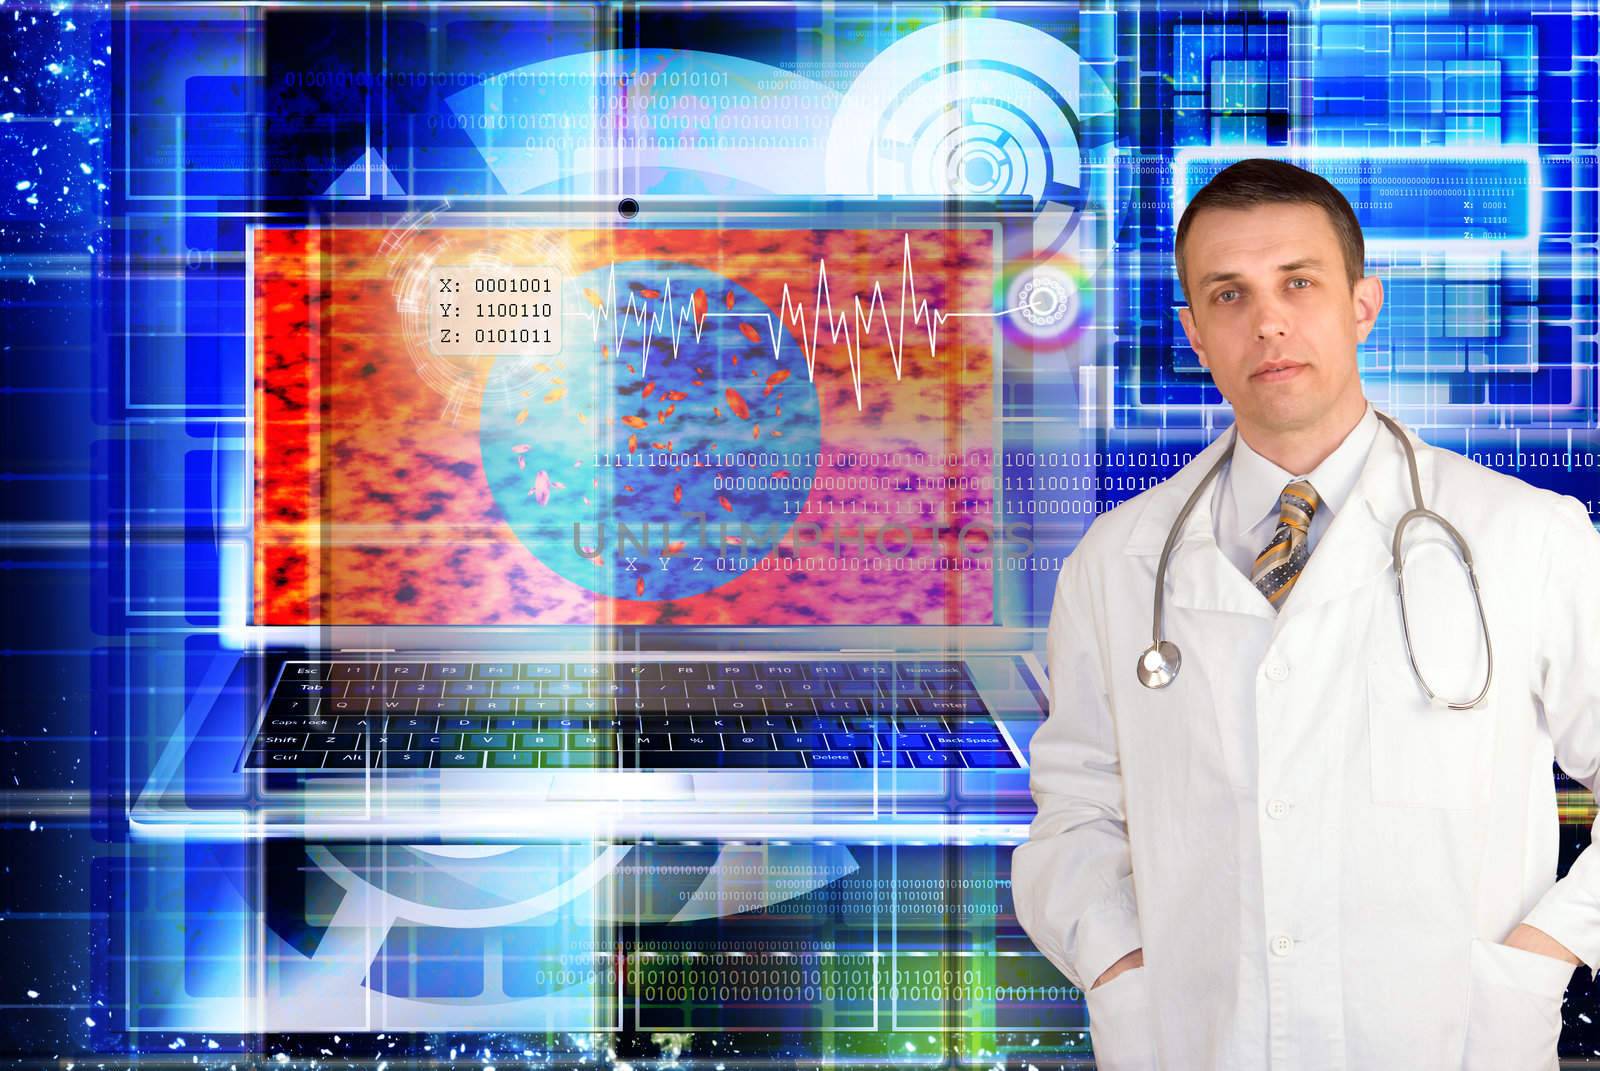 Scientific computer researches of public health services in the field of genetics.